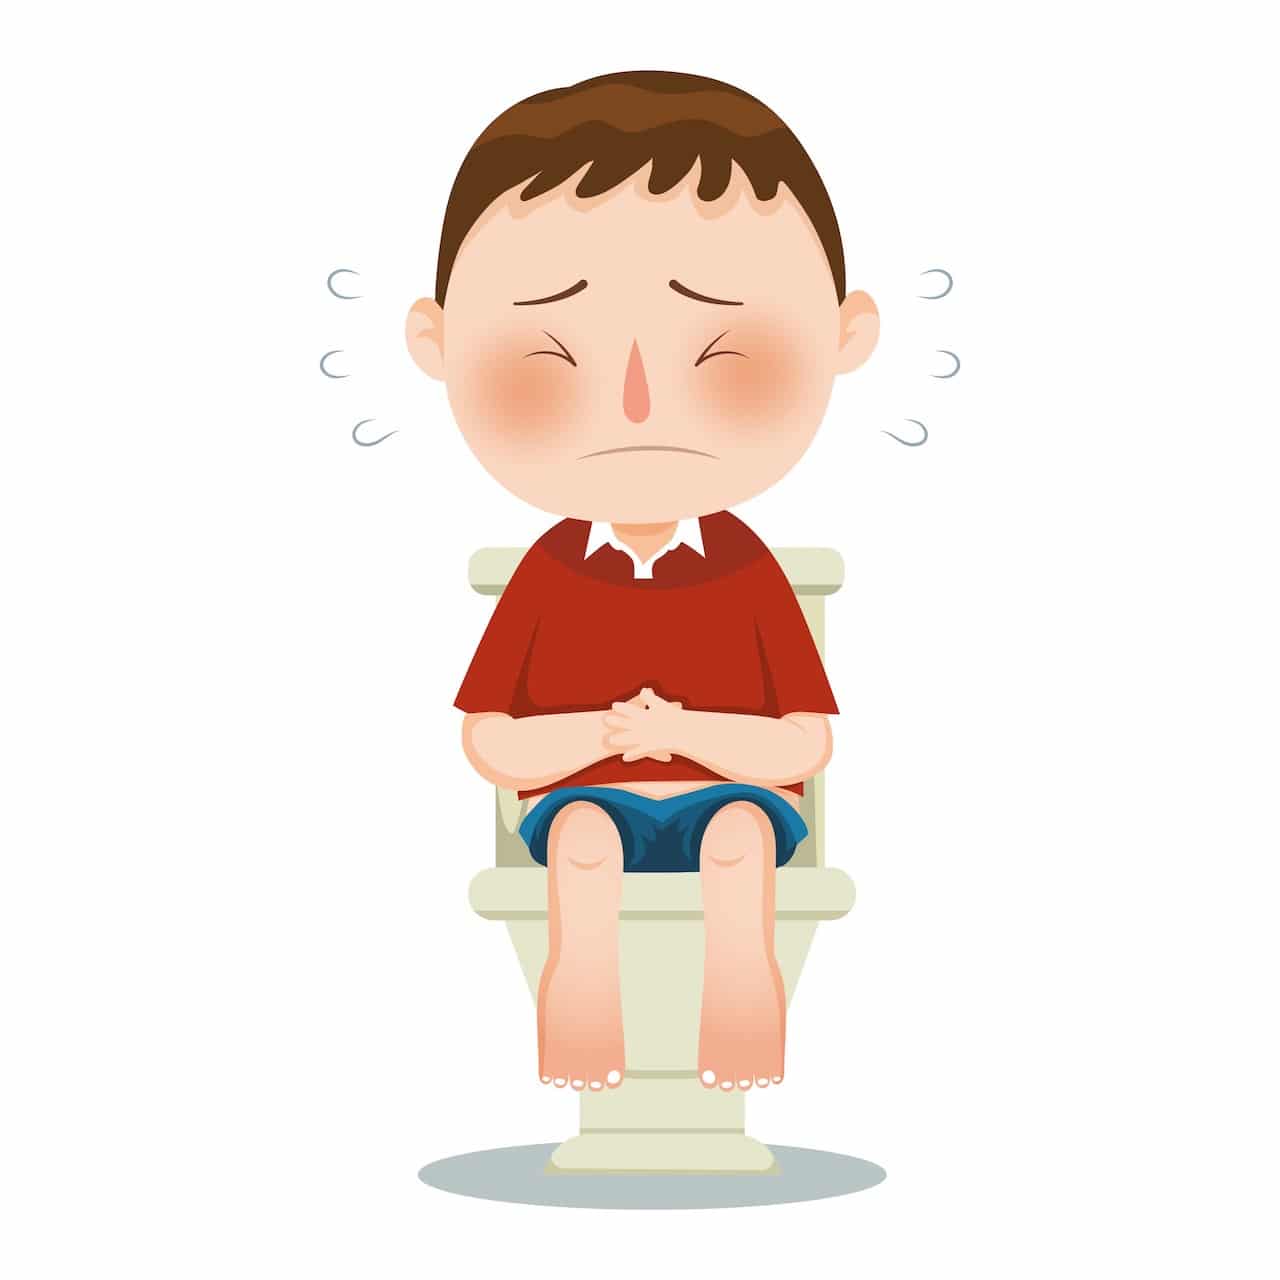 Constipation is difficulty passing stools regularly